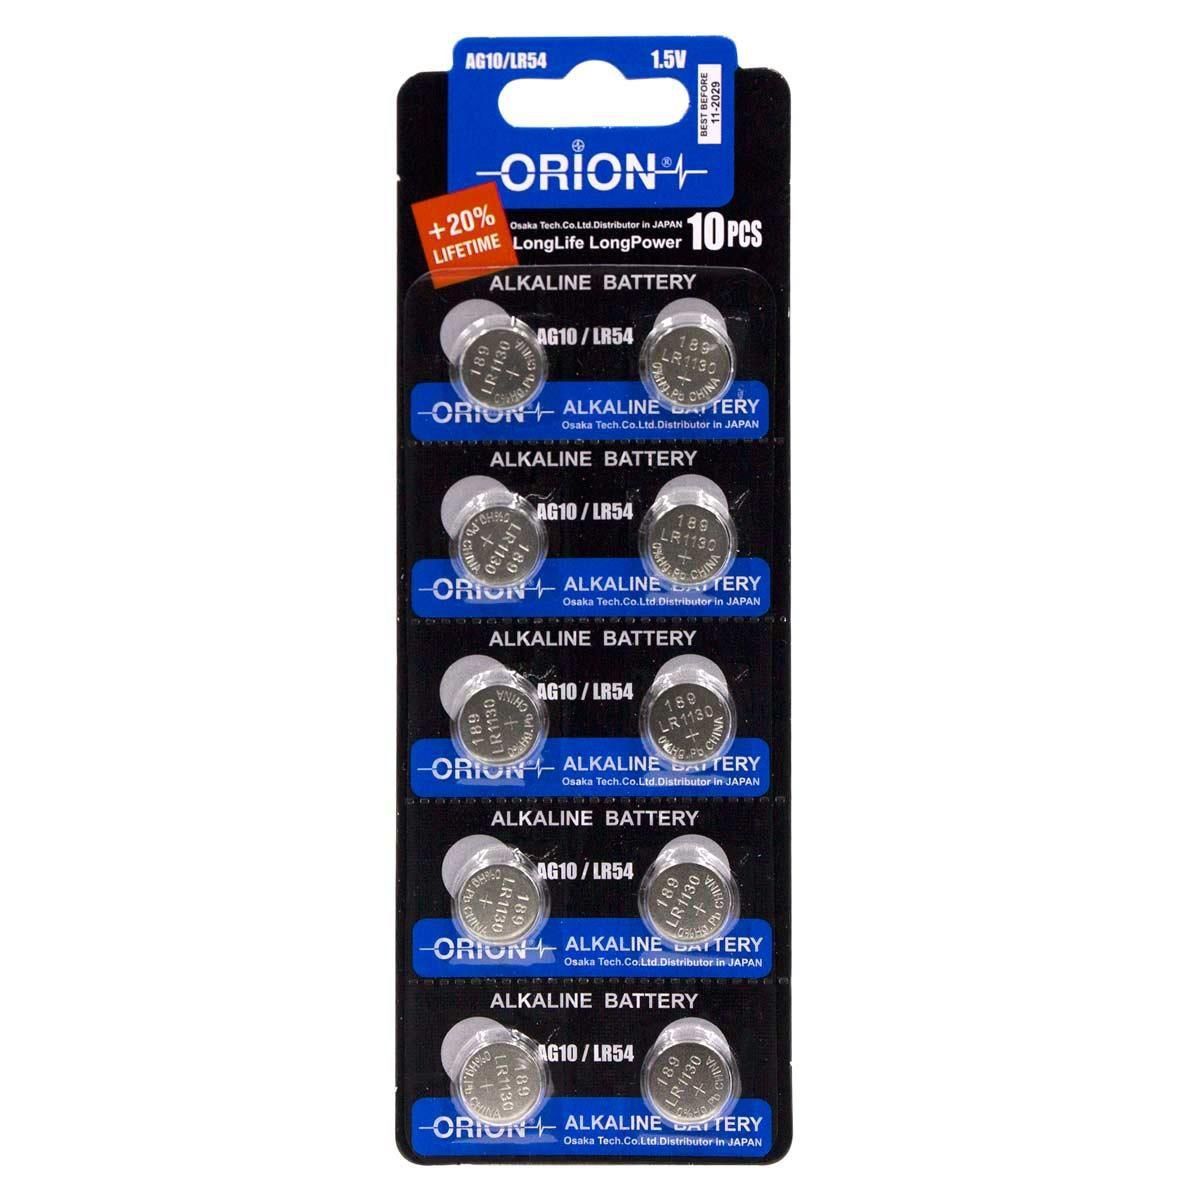 LR1130 AG10 189 1130 LR54 Pack Of 100 Toshiba Button Cell Batteries EXP  2024 